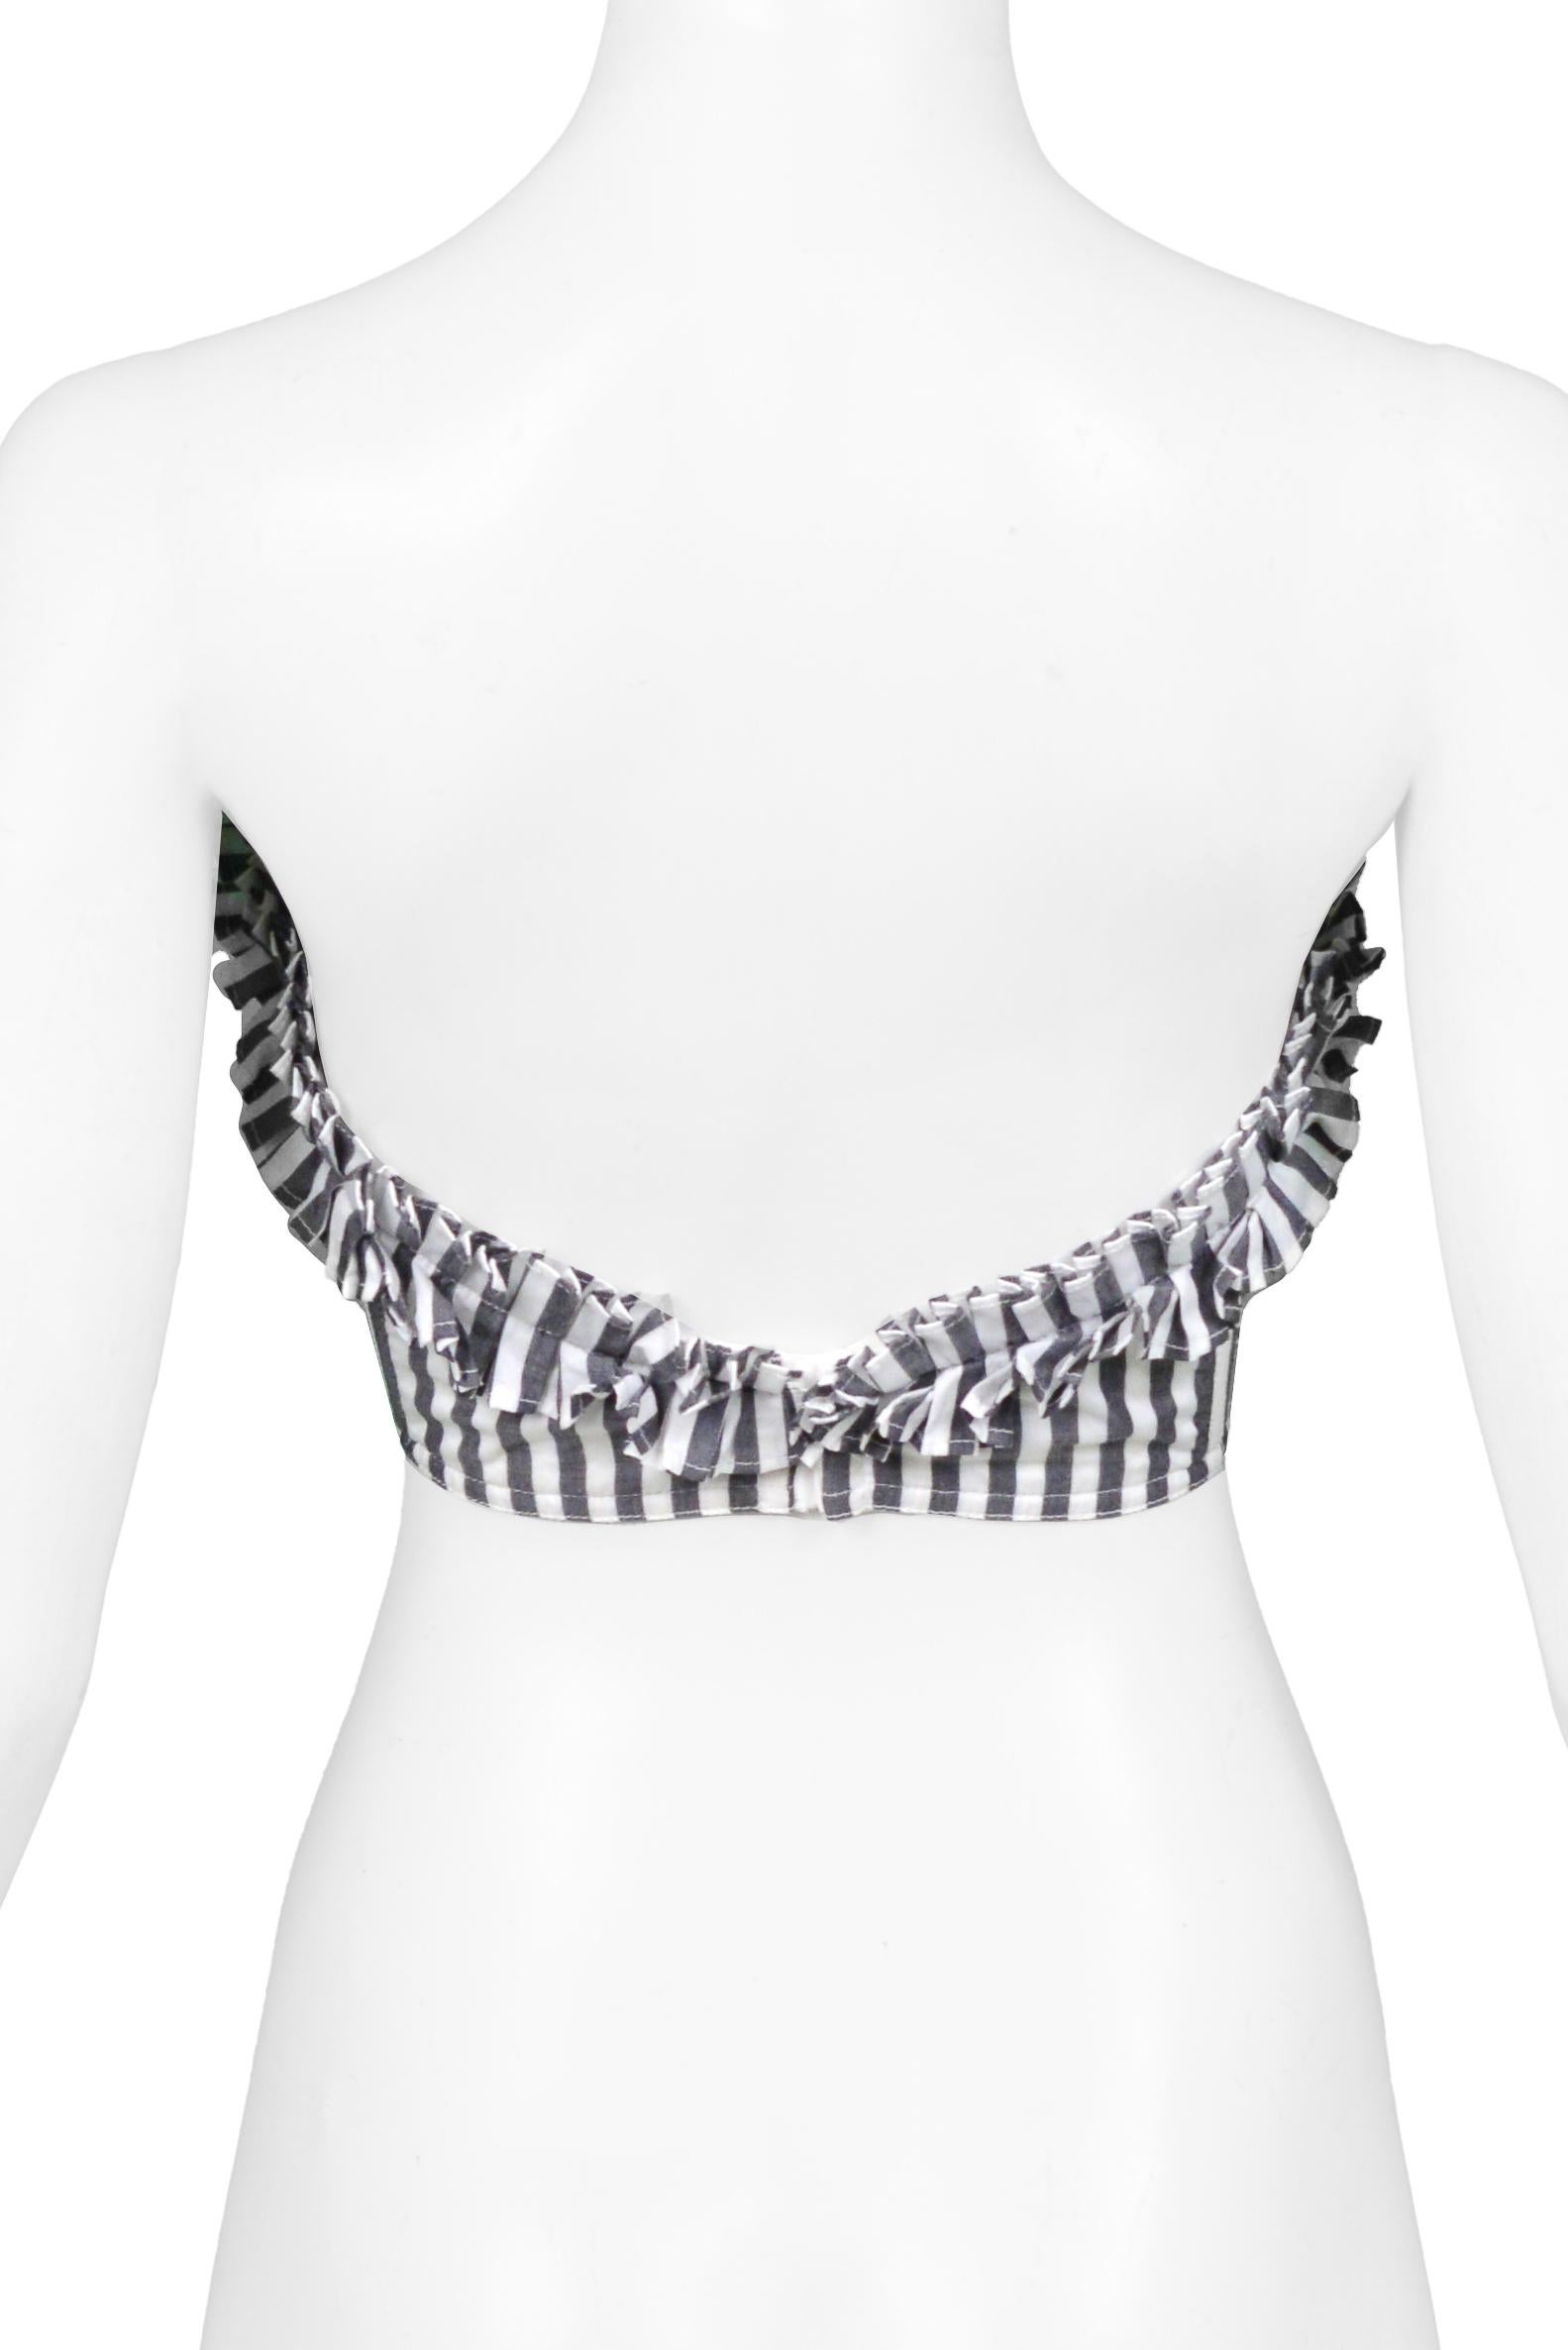 Chantal Thomass Black & White Striped Bustier Top With Ruffles In Excellent Condition For Sale In Los Angeles, CA